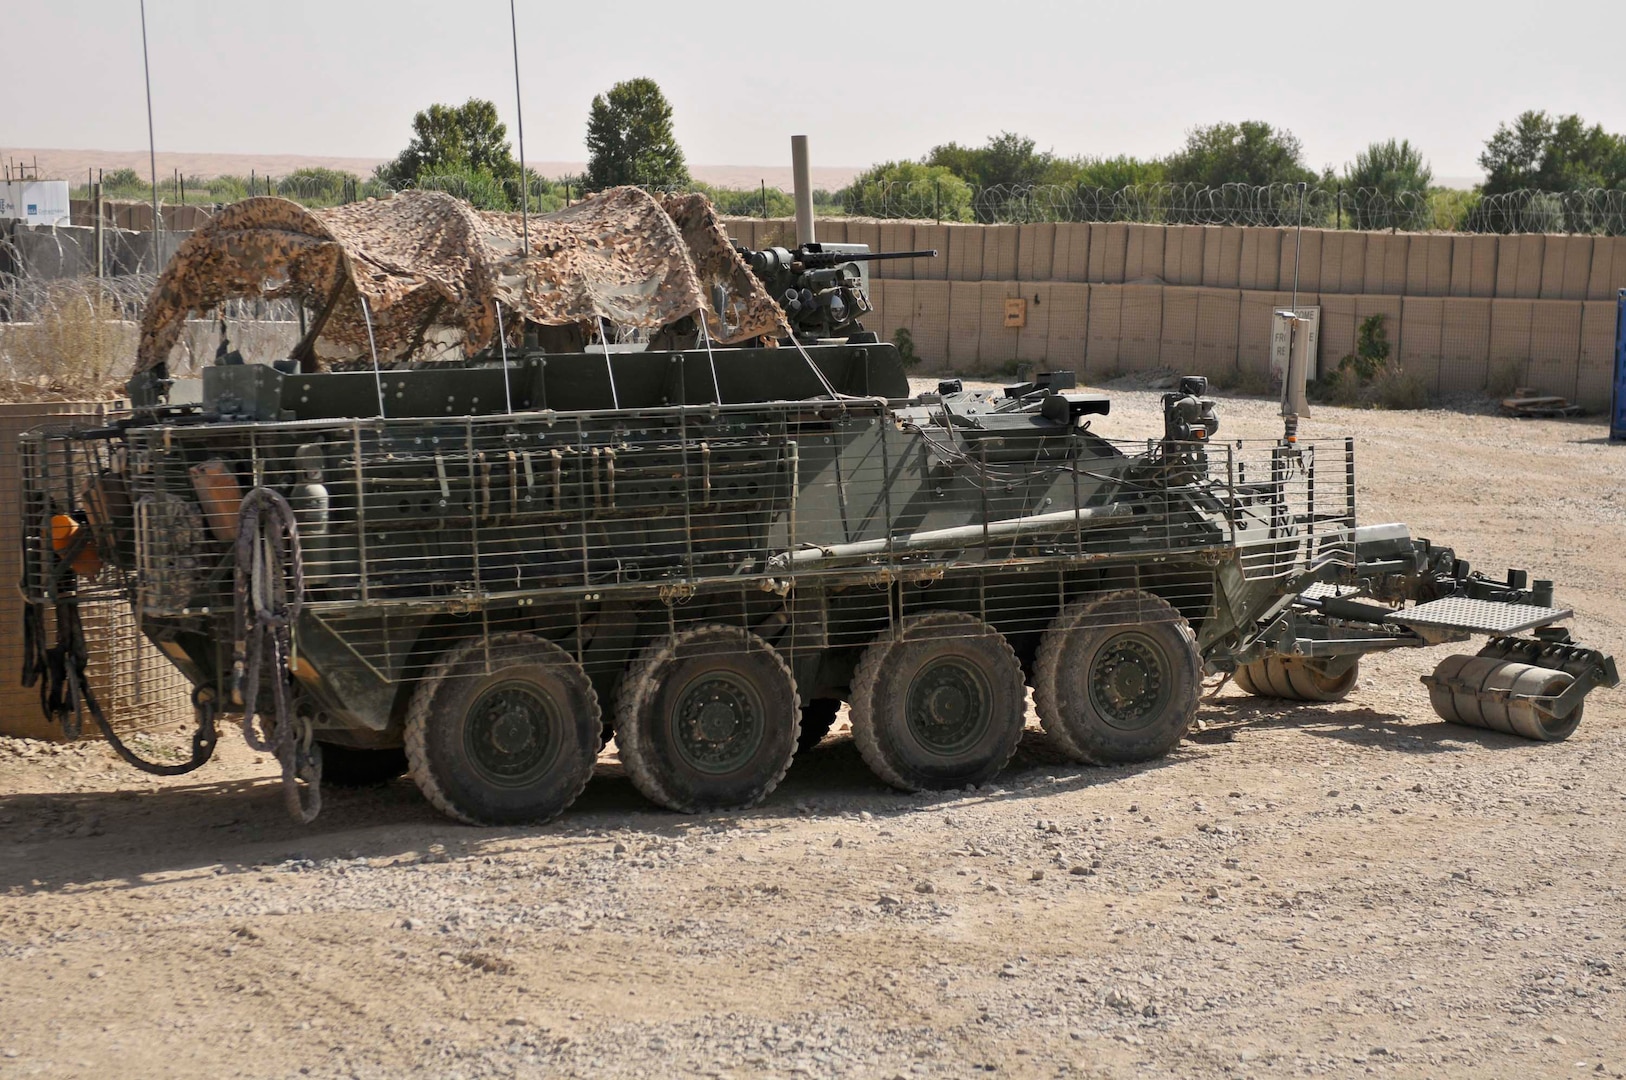 Some western state governors have requested conversion from tanks to Stryker brigades for their National Guard units. Here, U.S. Army troops with 1st Squadron, Combined Task Force Dragoon, occupy a security position in a Stryker vehicle July 20, 2013 at Zangabad, Afghanistan.